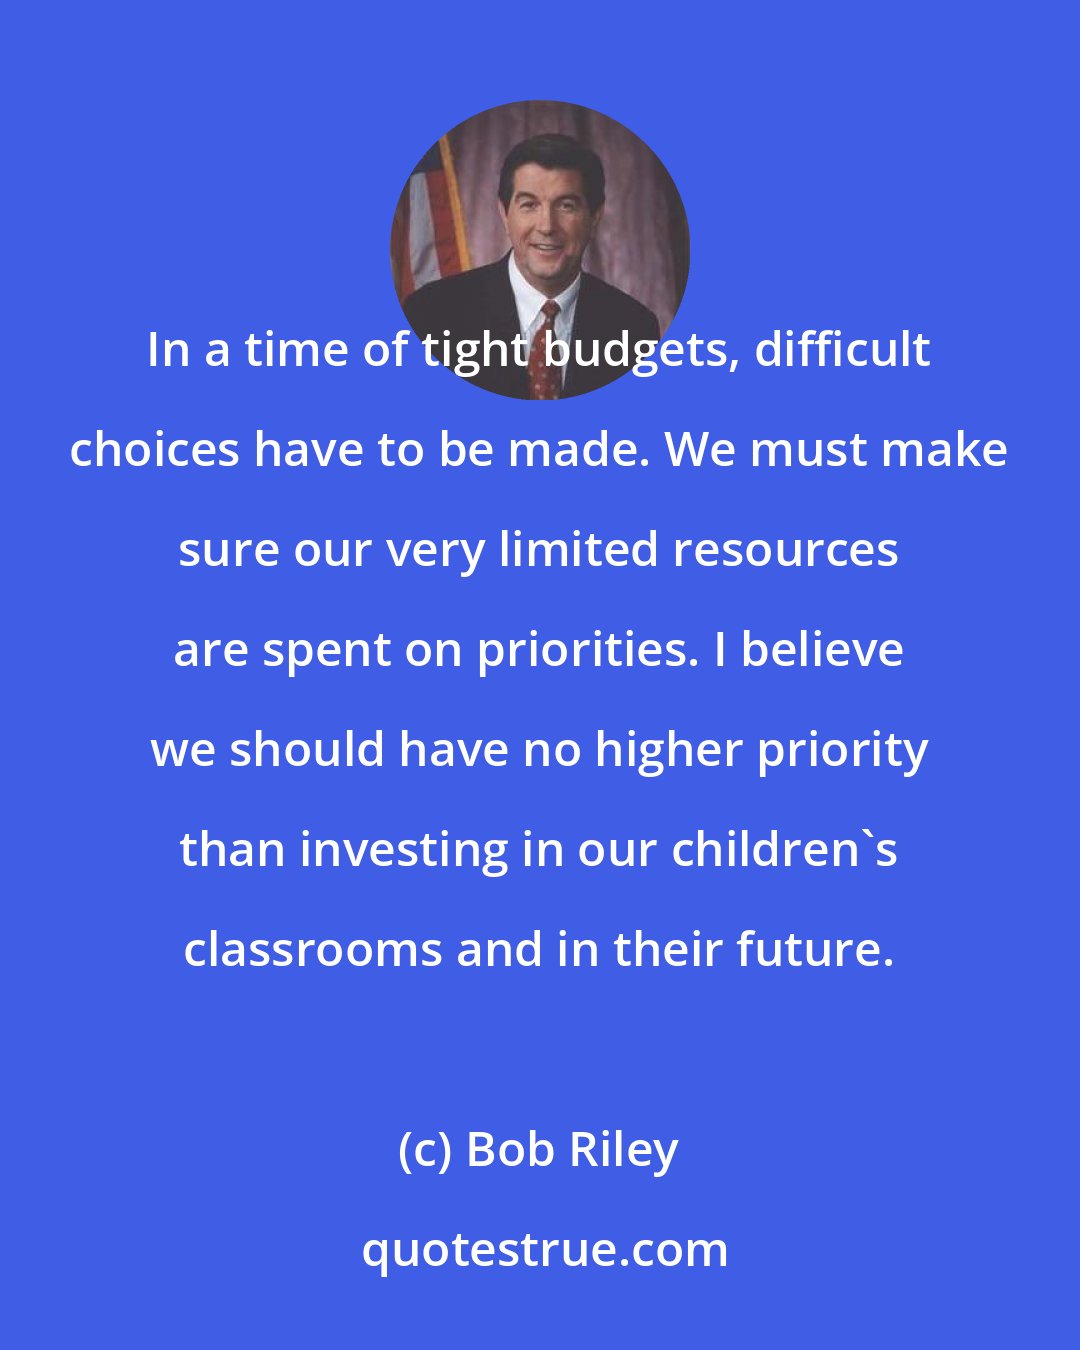 Bob Riley: In a time of tight budgets, difficult choices have to be made. We must make sure our very limited resources are spent on priorities. I believe we should have no higher priority than investing in our children's classrooms and in their future.